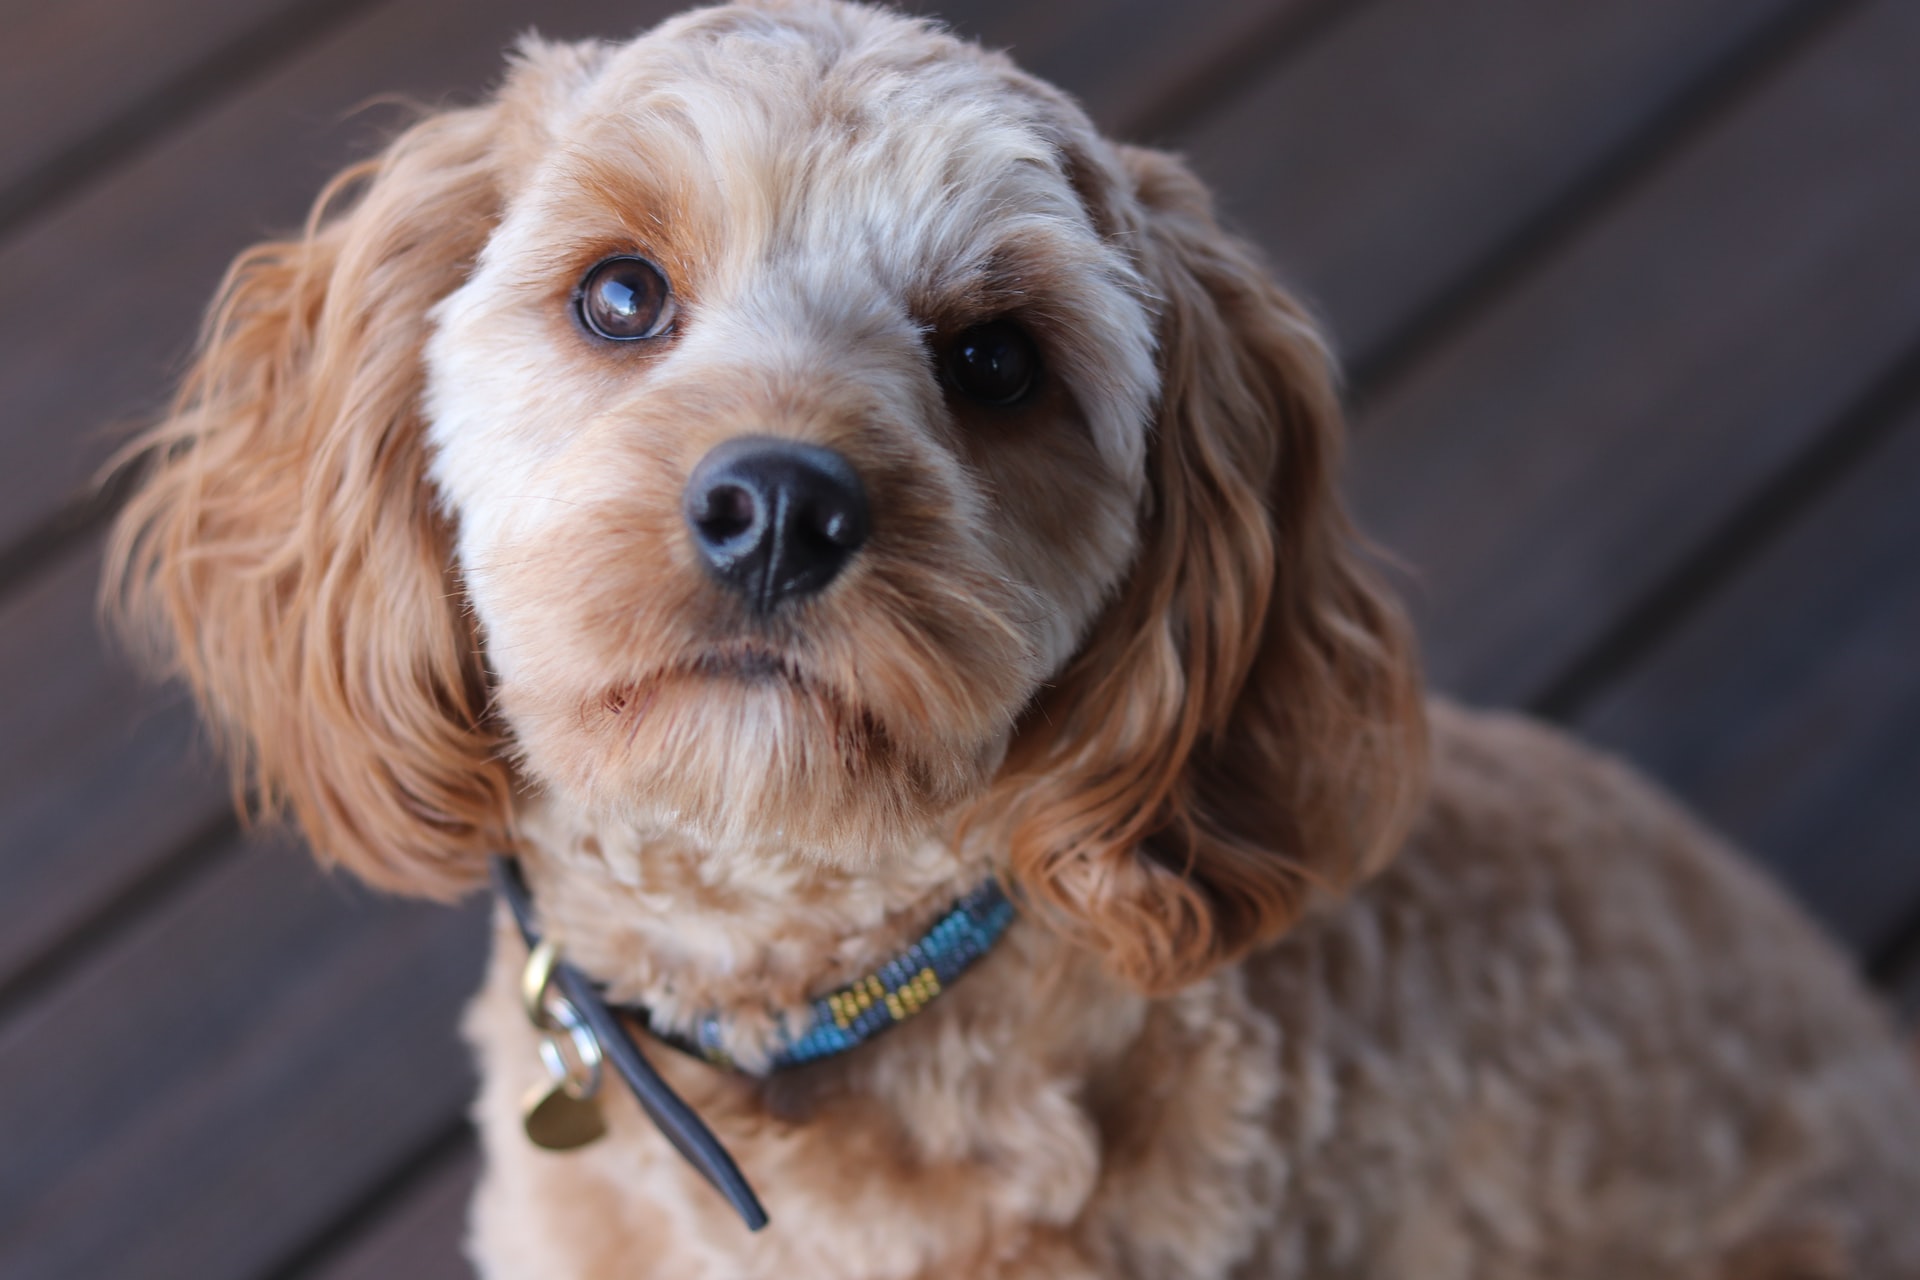 Cavapoo Dogs – Pros and Cons from Puppies to Adults